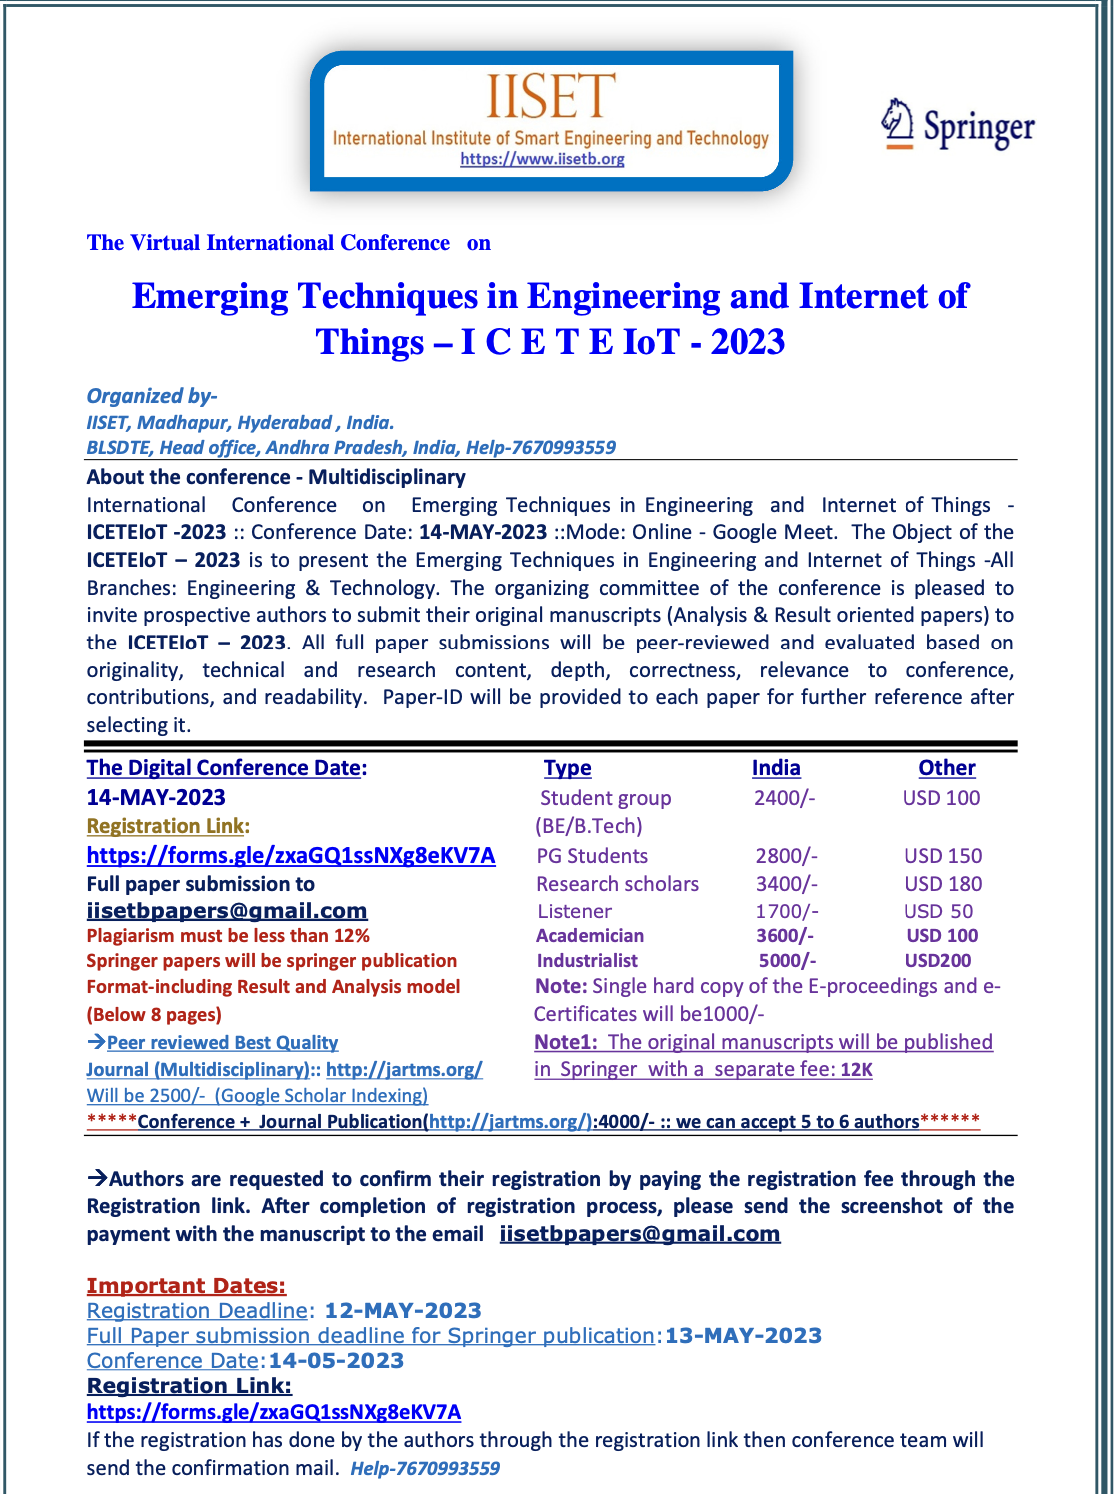 The Virtual International Conference on Emerging Techniques in Engineering and Internet of Things ICETE IoT - 2023